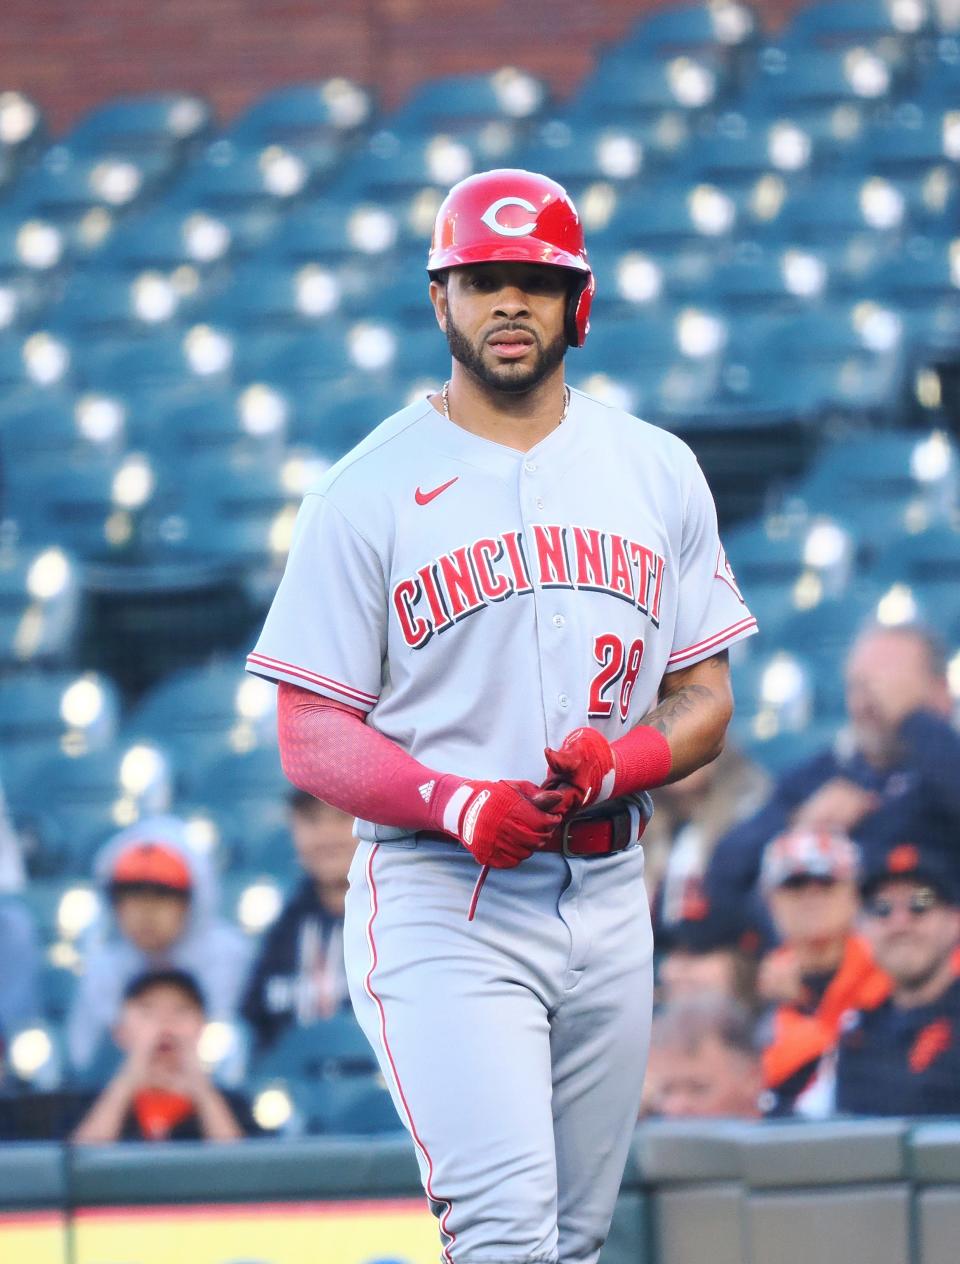 Cincinnati Reds left fielder Tommy Pham (28) returns to the dugout after being tagged out at first base against the San Francisco Giants during the first inning at Oracle Park on June 24.